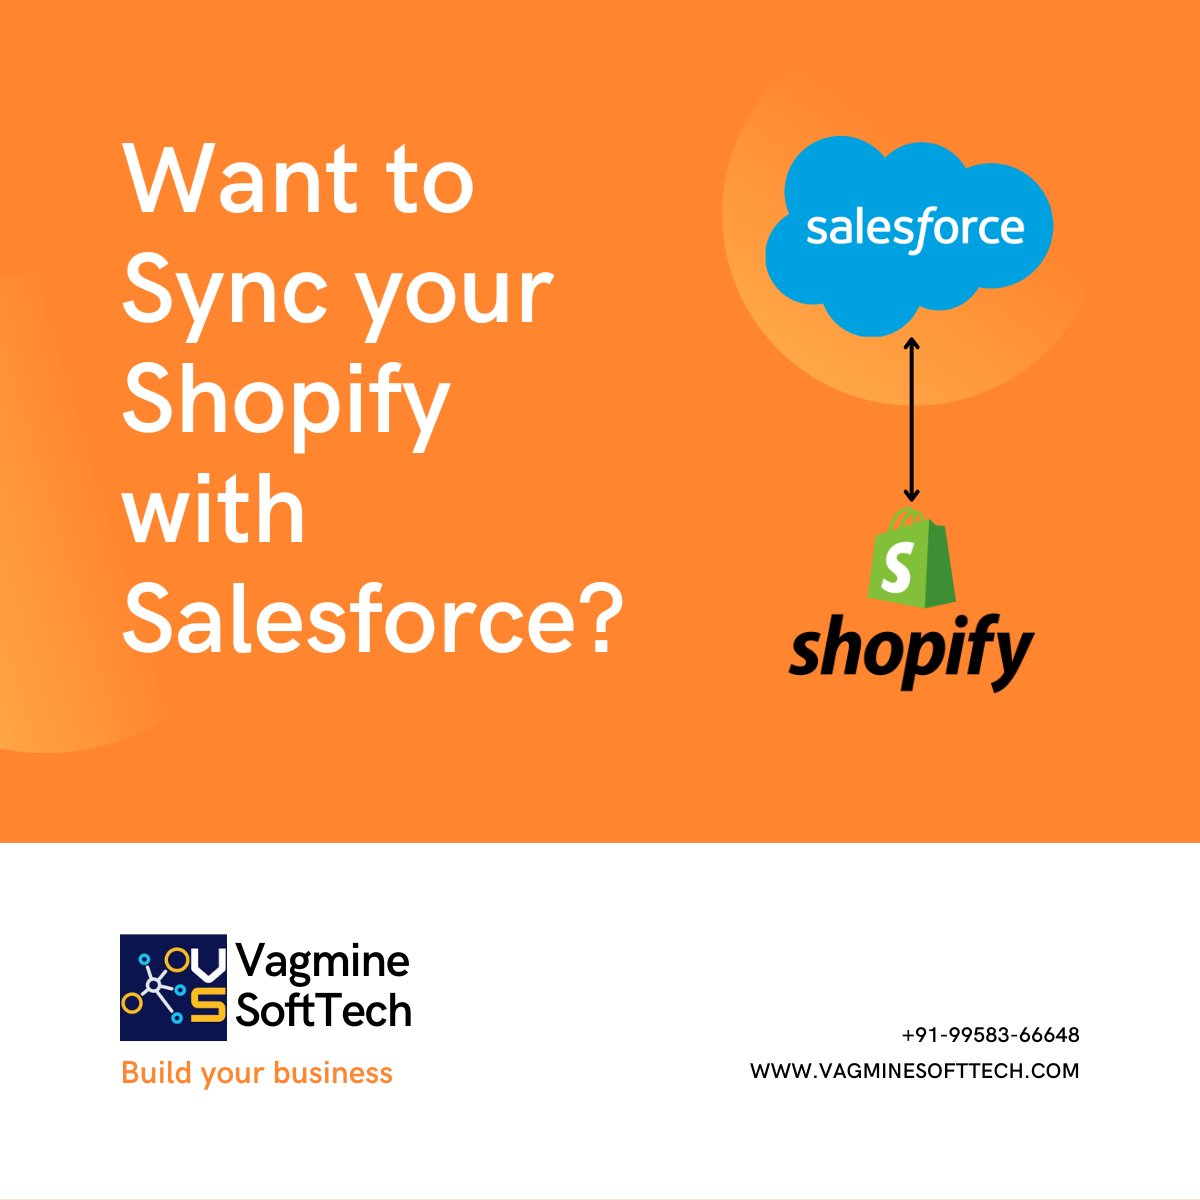 If you are running your e-commerce business and want to sync your e-commerce data with Salesforce. Connect us to sync your data with Salesforce.

#salesforce #salesforceohana #trailblazercommunity #business #data #shopify #vagminesofttech #vagminecloud #salesforceconsulting